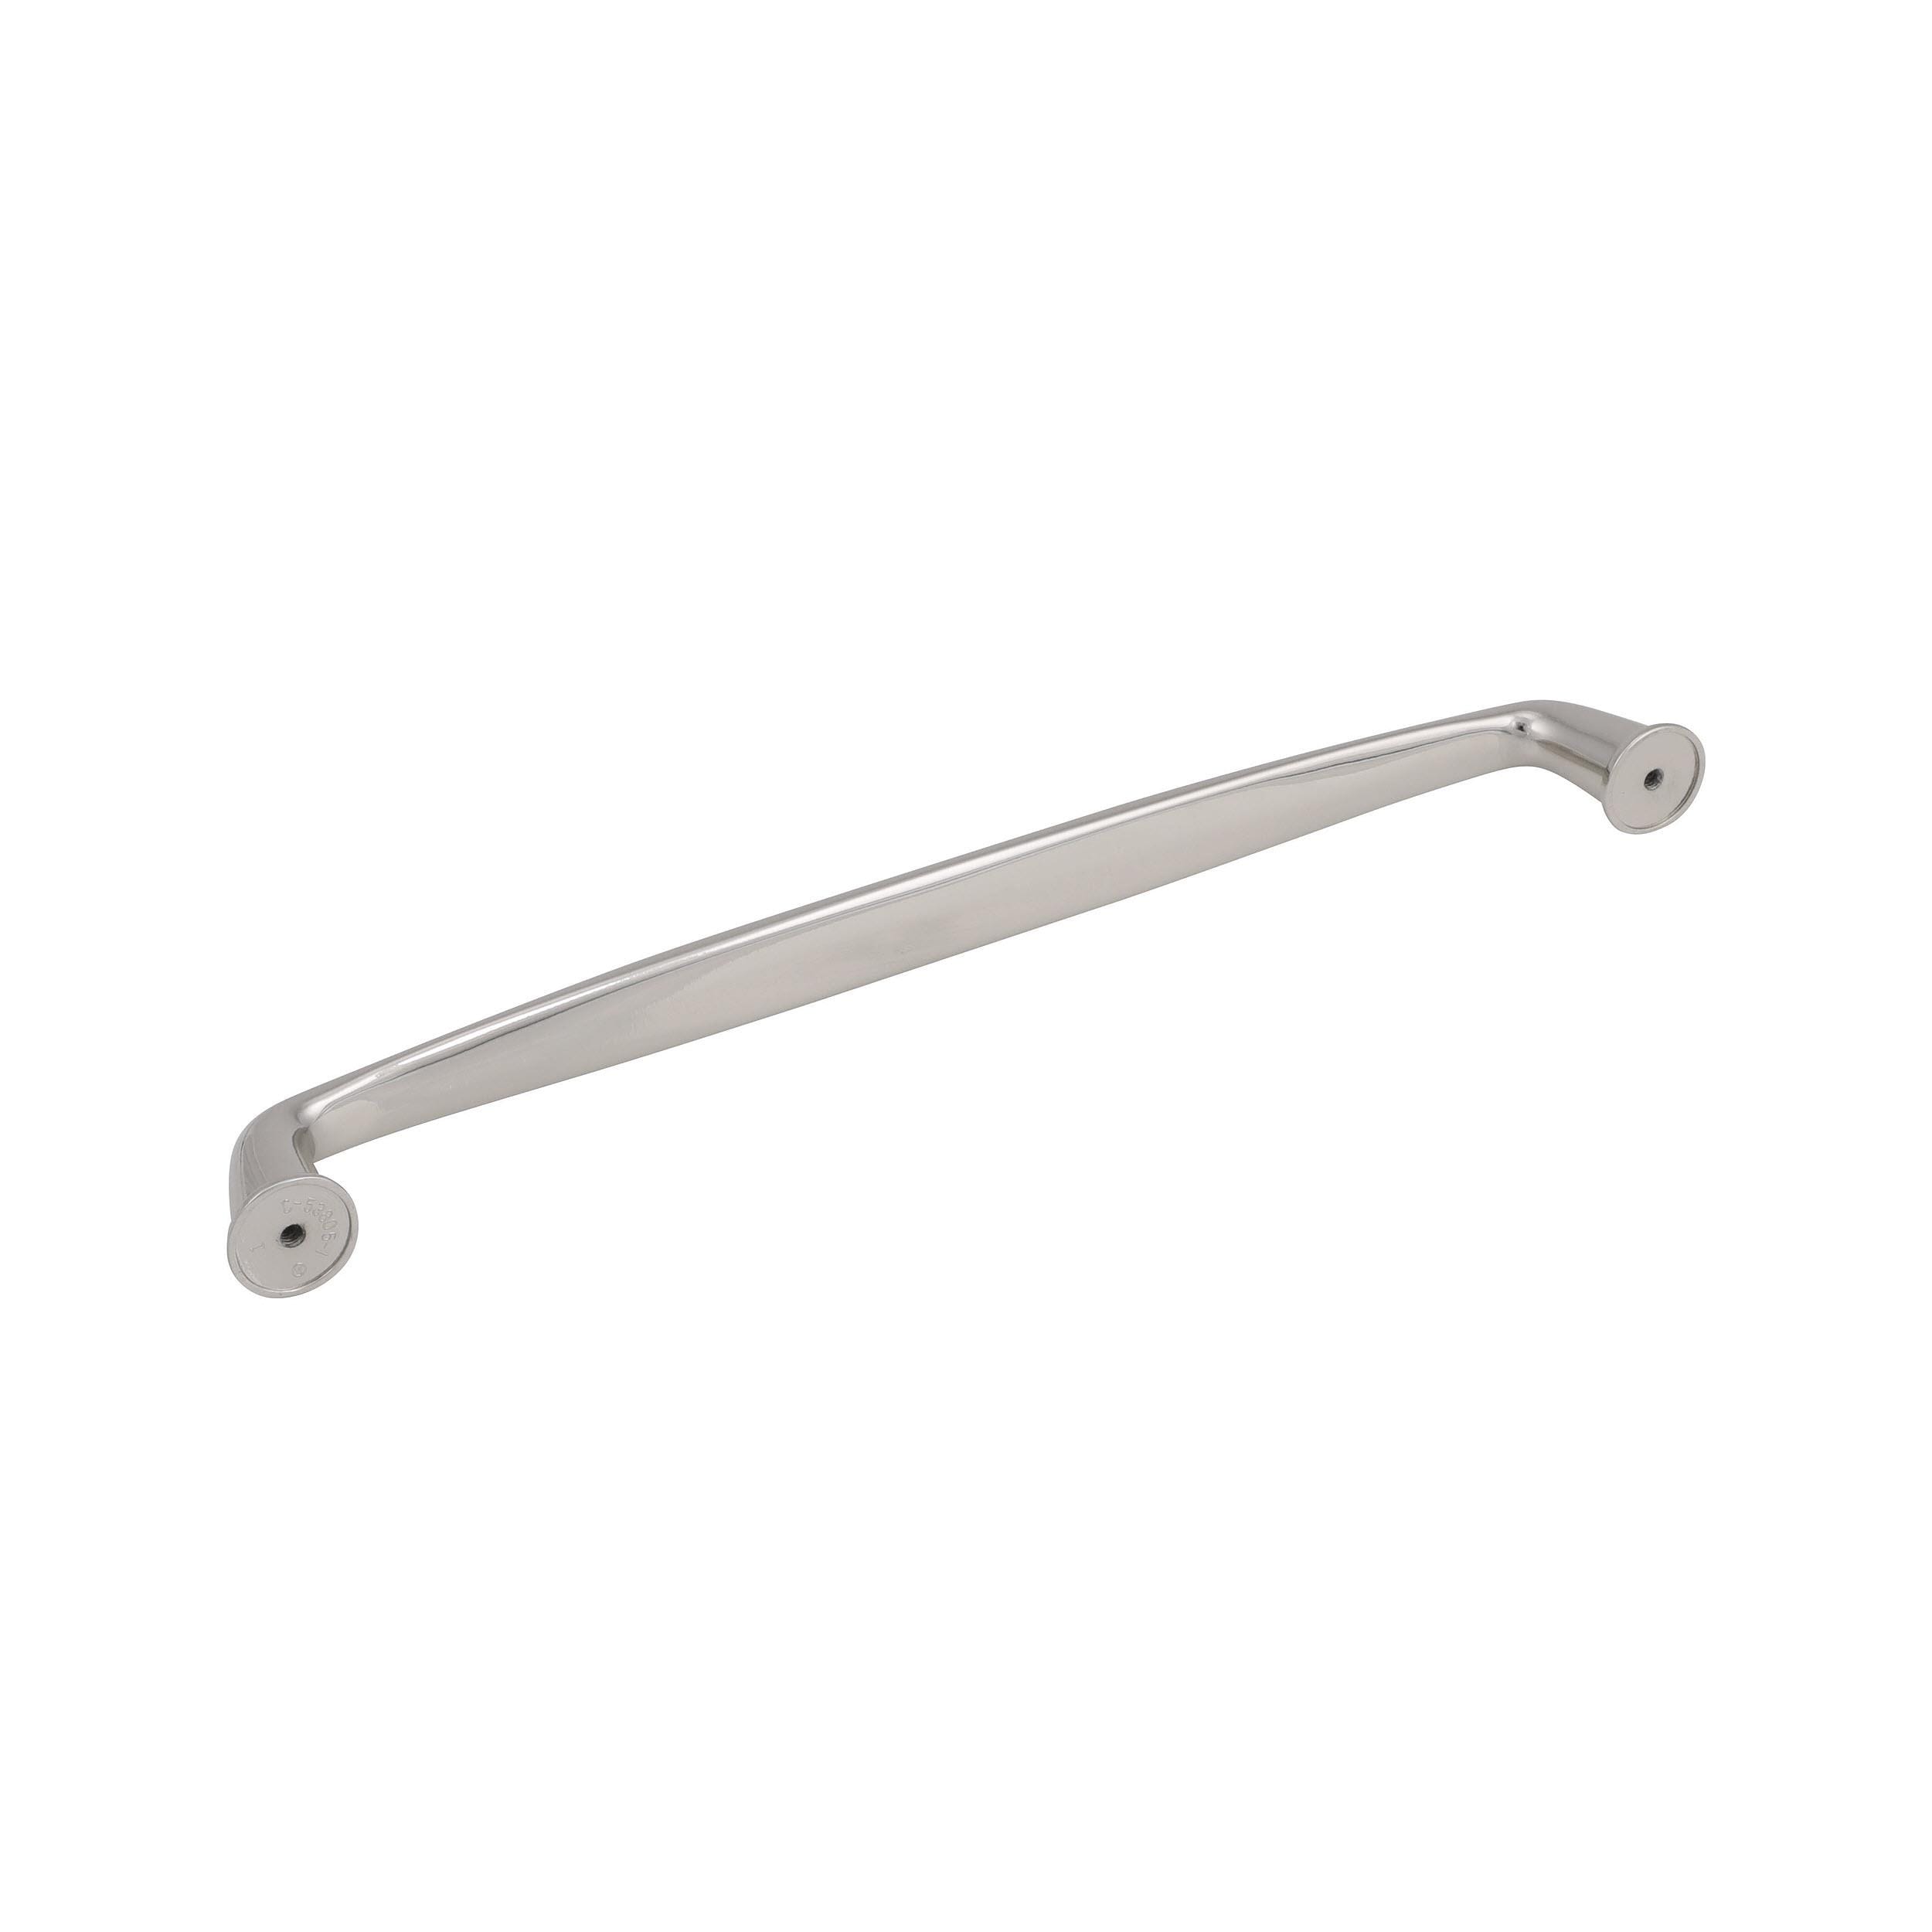 Amerock Kane 12-in Center to Center Polished Nickel Arch Appliance For Use on Appliances Drawer Pulls